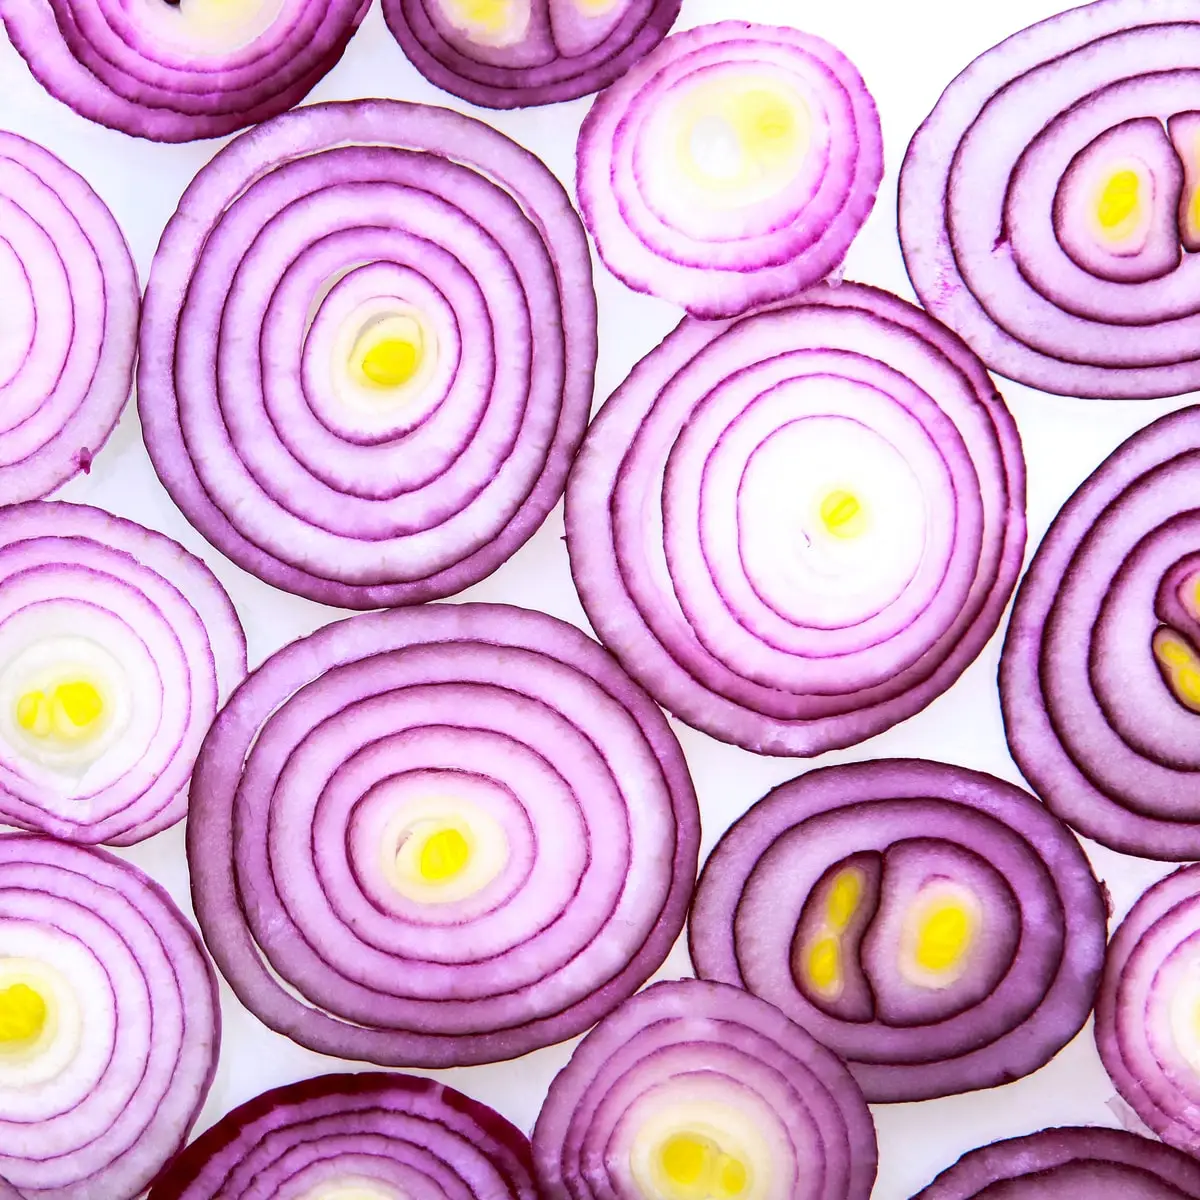 9 Ways to Chop an Onion without Shedding Tears ...